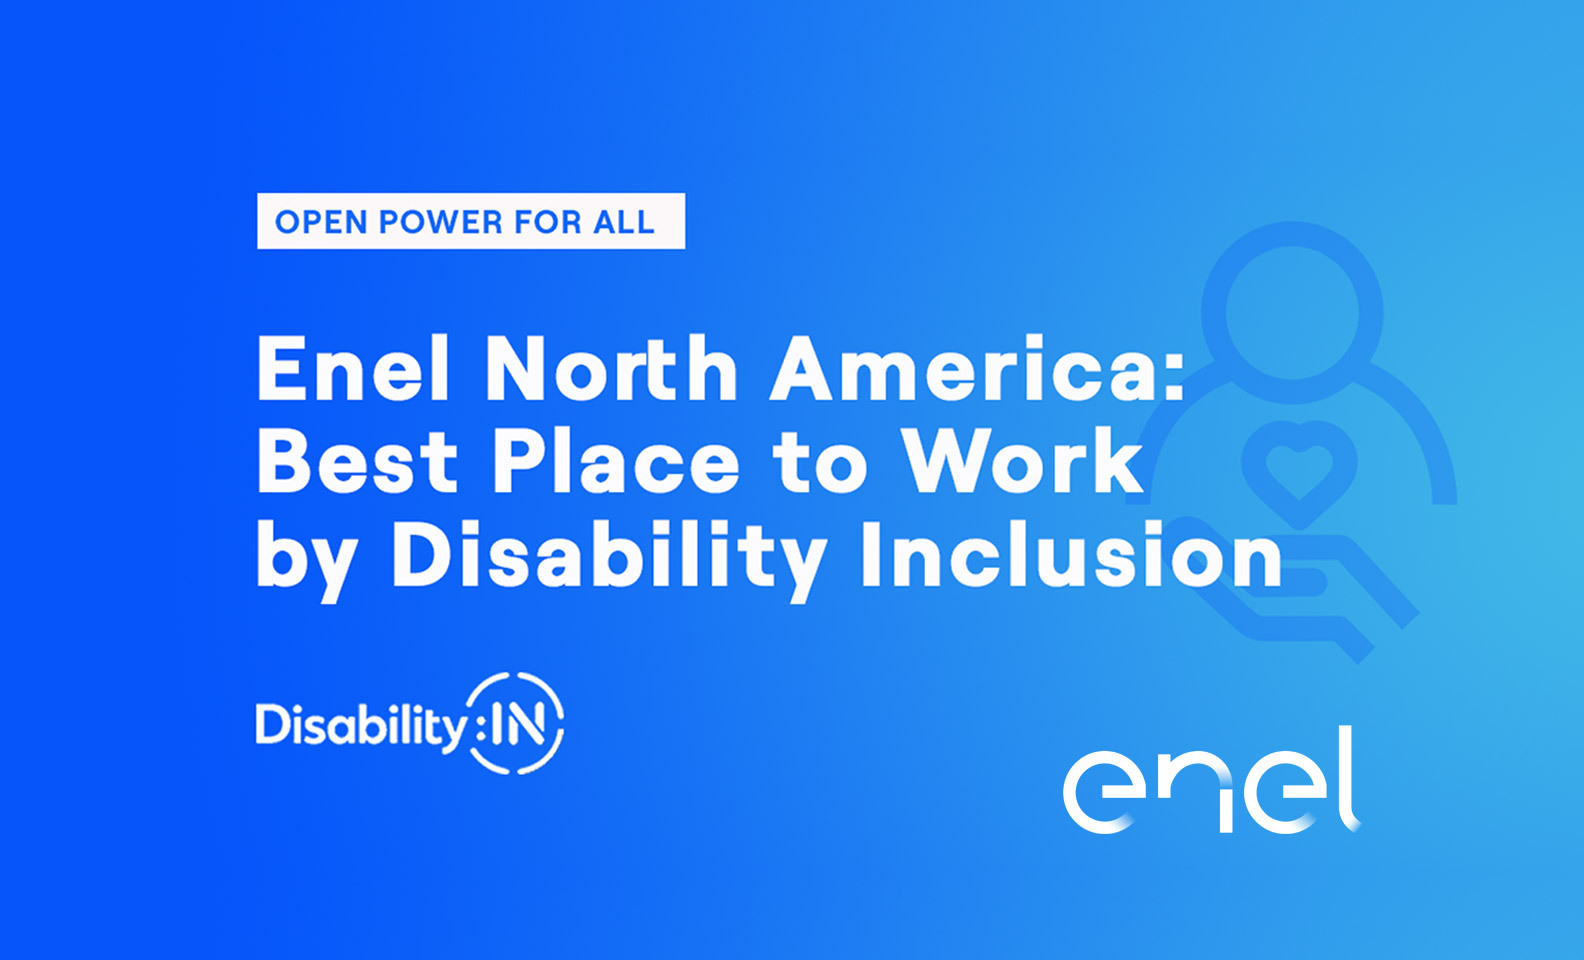 Enel North America recognized as best place to work for disability  inclusion